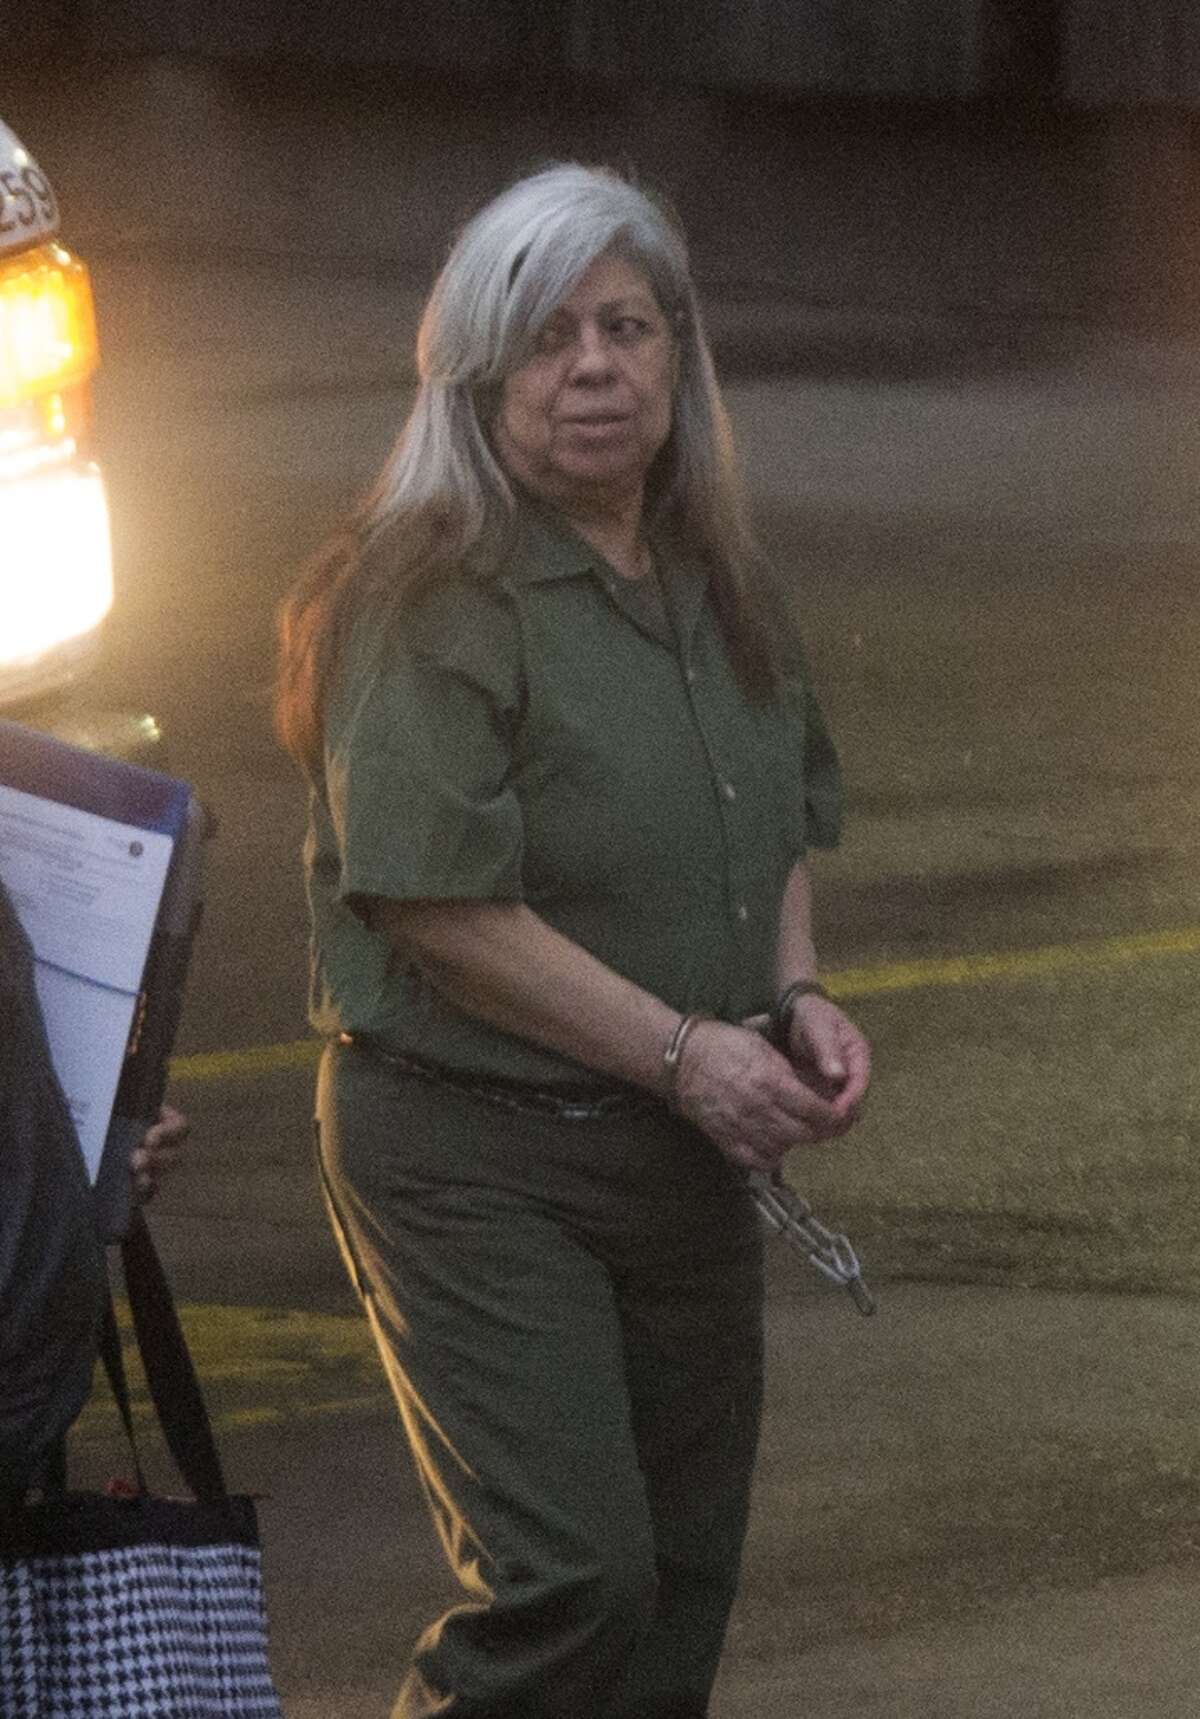 1. Houston a major player. The Houston region is a major sex and human trafficking hub given its size, proximity to the border and large immigrant population, according to officials. Hortencia Medeles enters the federal courthouse In Houston at sunrise Monday, April 13, 2015 for the first day of her trial on charges she led a sex-trafficking ring. She faces up to live in convicted. (Cody Duty / Houston Chronicle)